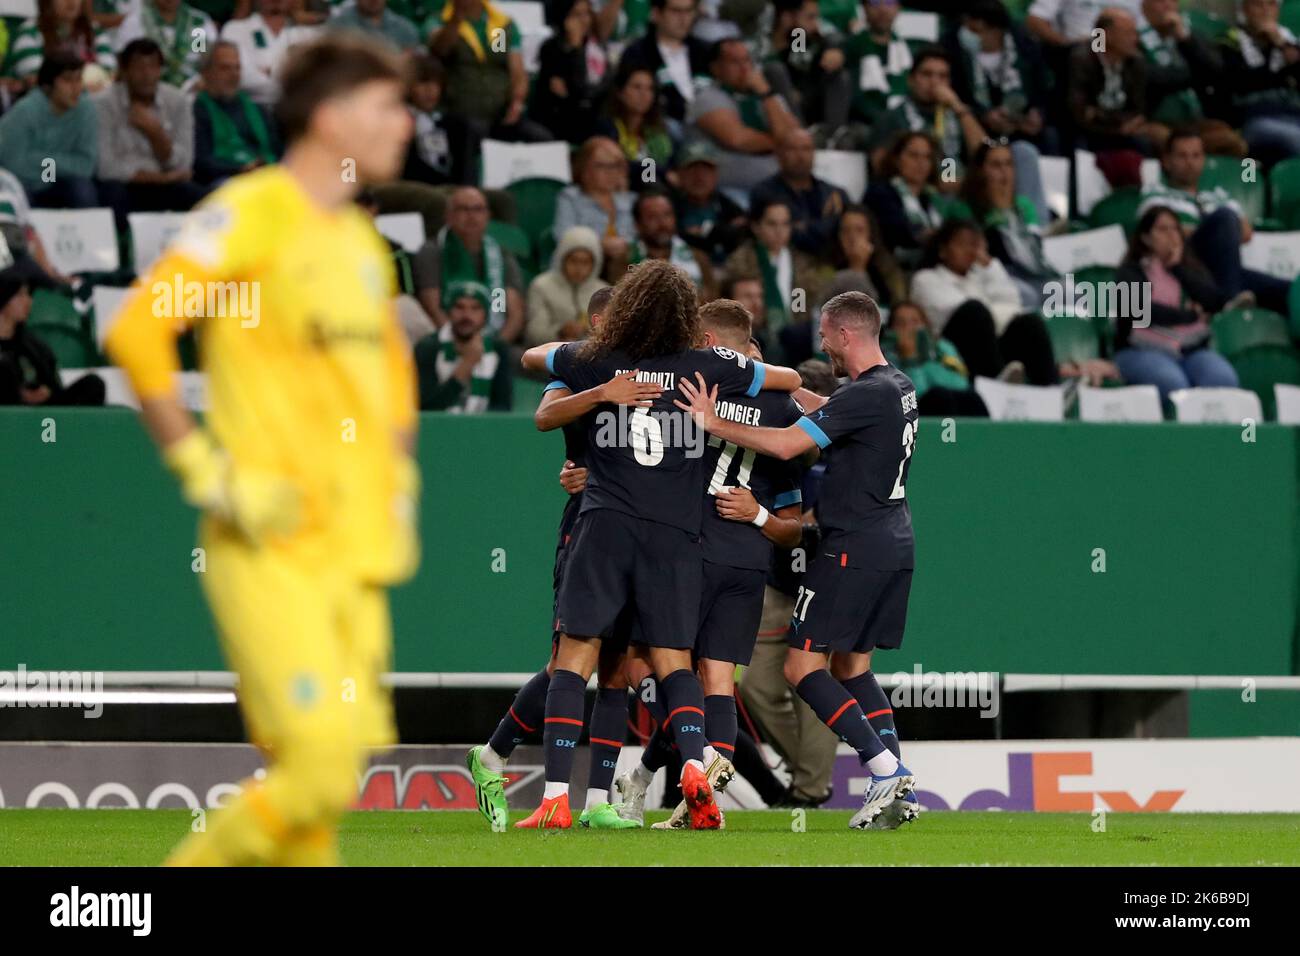 Lisbon, Portugal. 12th Oct, 2022. Players of Marseille (back) celebrate their goal during the UEFA Champions League Group D match between Sporting CP and Olympique de Marseille in Lisbon, Portugal, on Oct. 12, 2022. Credit: Pedro Fiuza/Xinhua/Alamy Live News Stock Photo